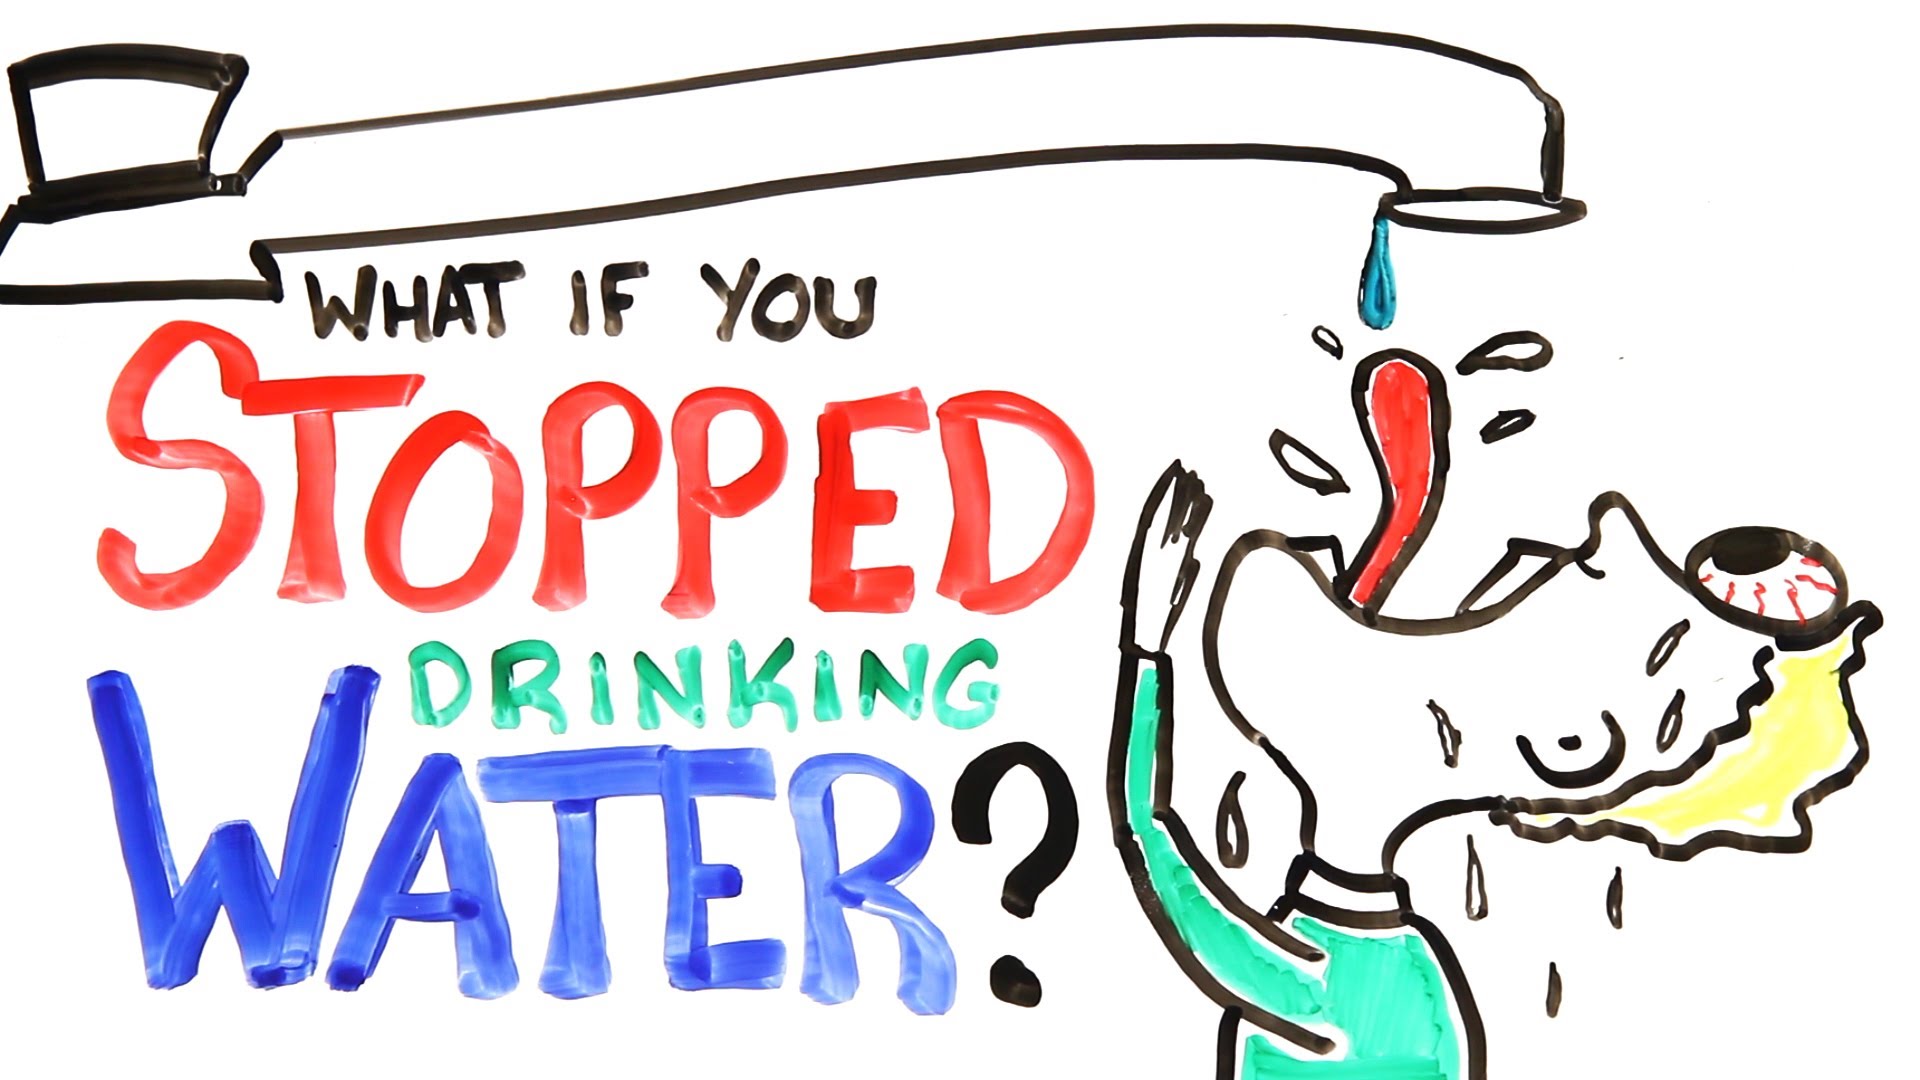 What If You Stopped Drinking Water? - YouTube